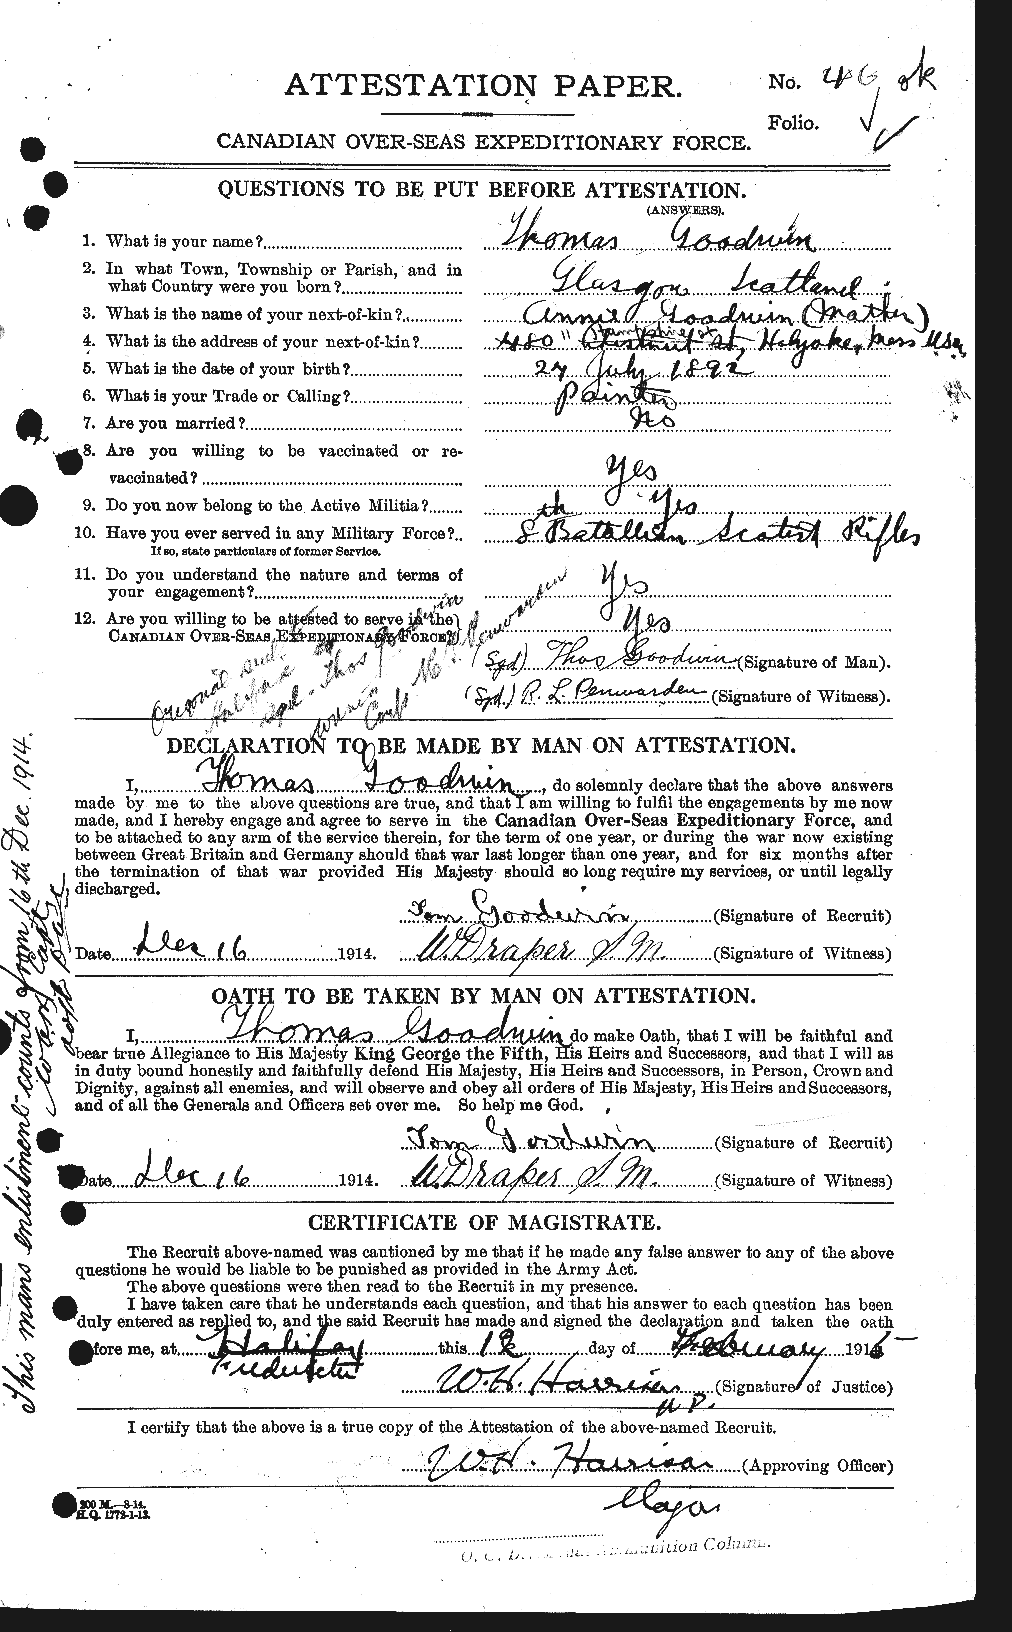 Personnel Records of the First World War - CEF 355248a